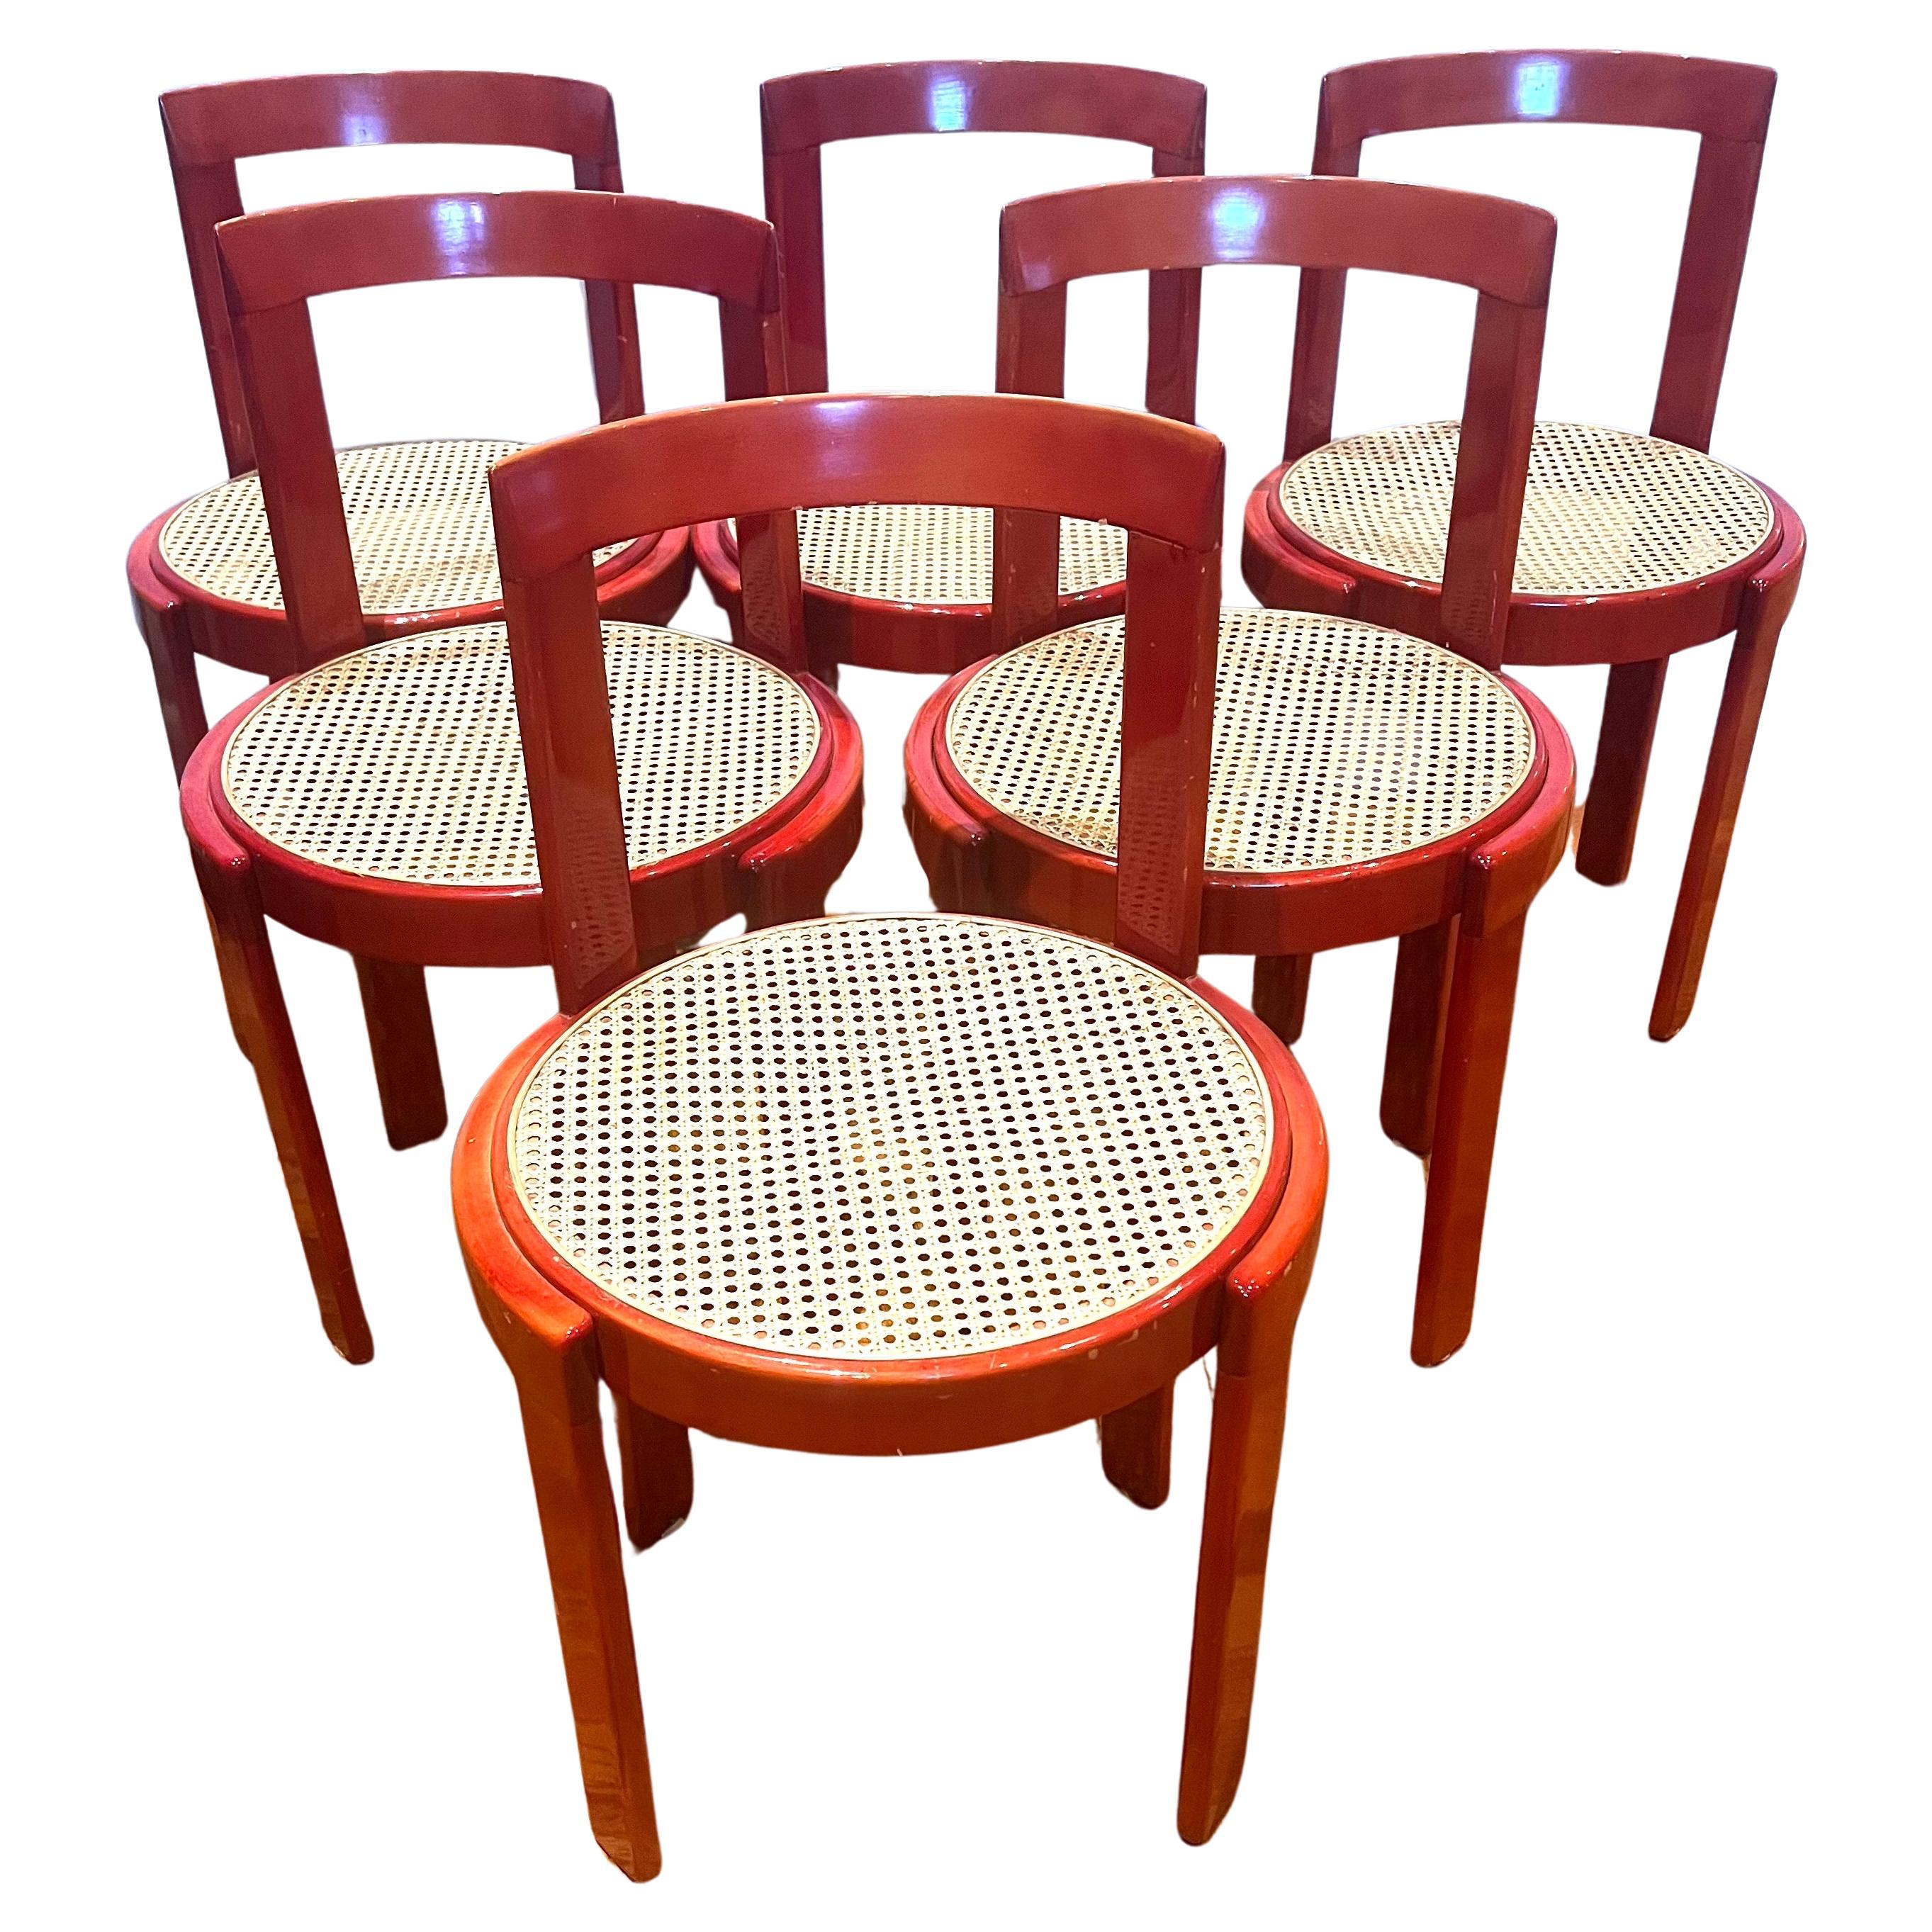 20th Century Italian Bentwood Caned Set of 6 Red Lacquered Chairs Mid Century Modernist For Sale